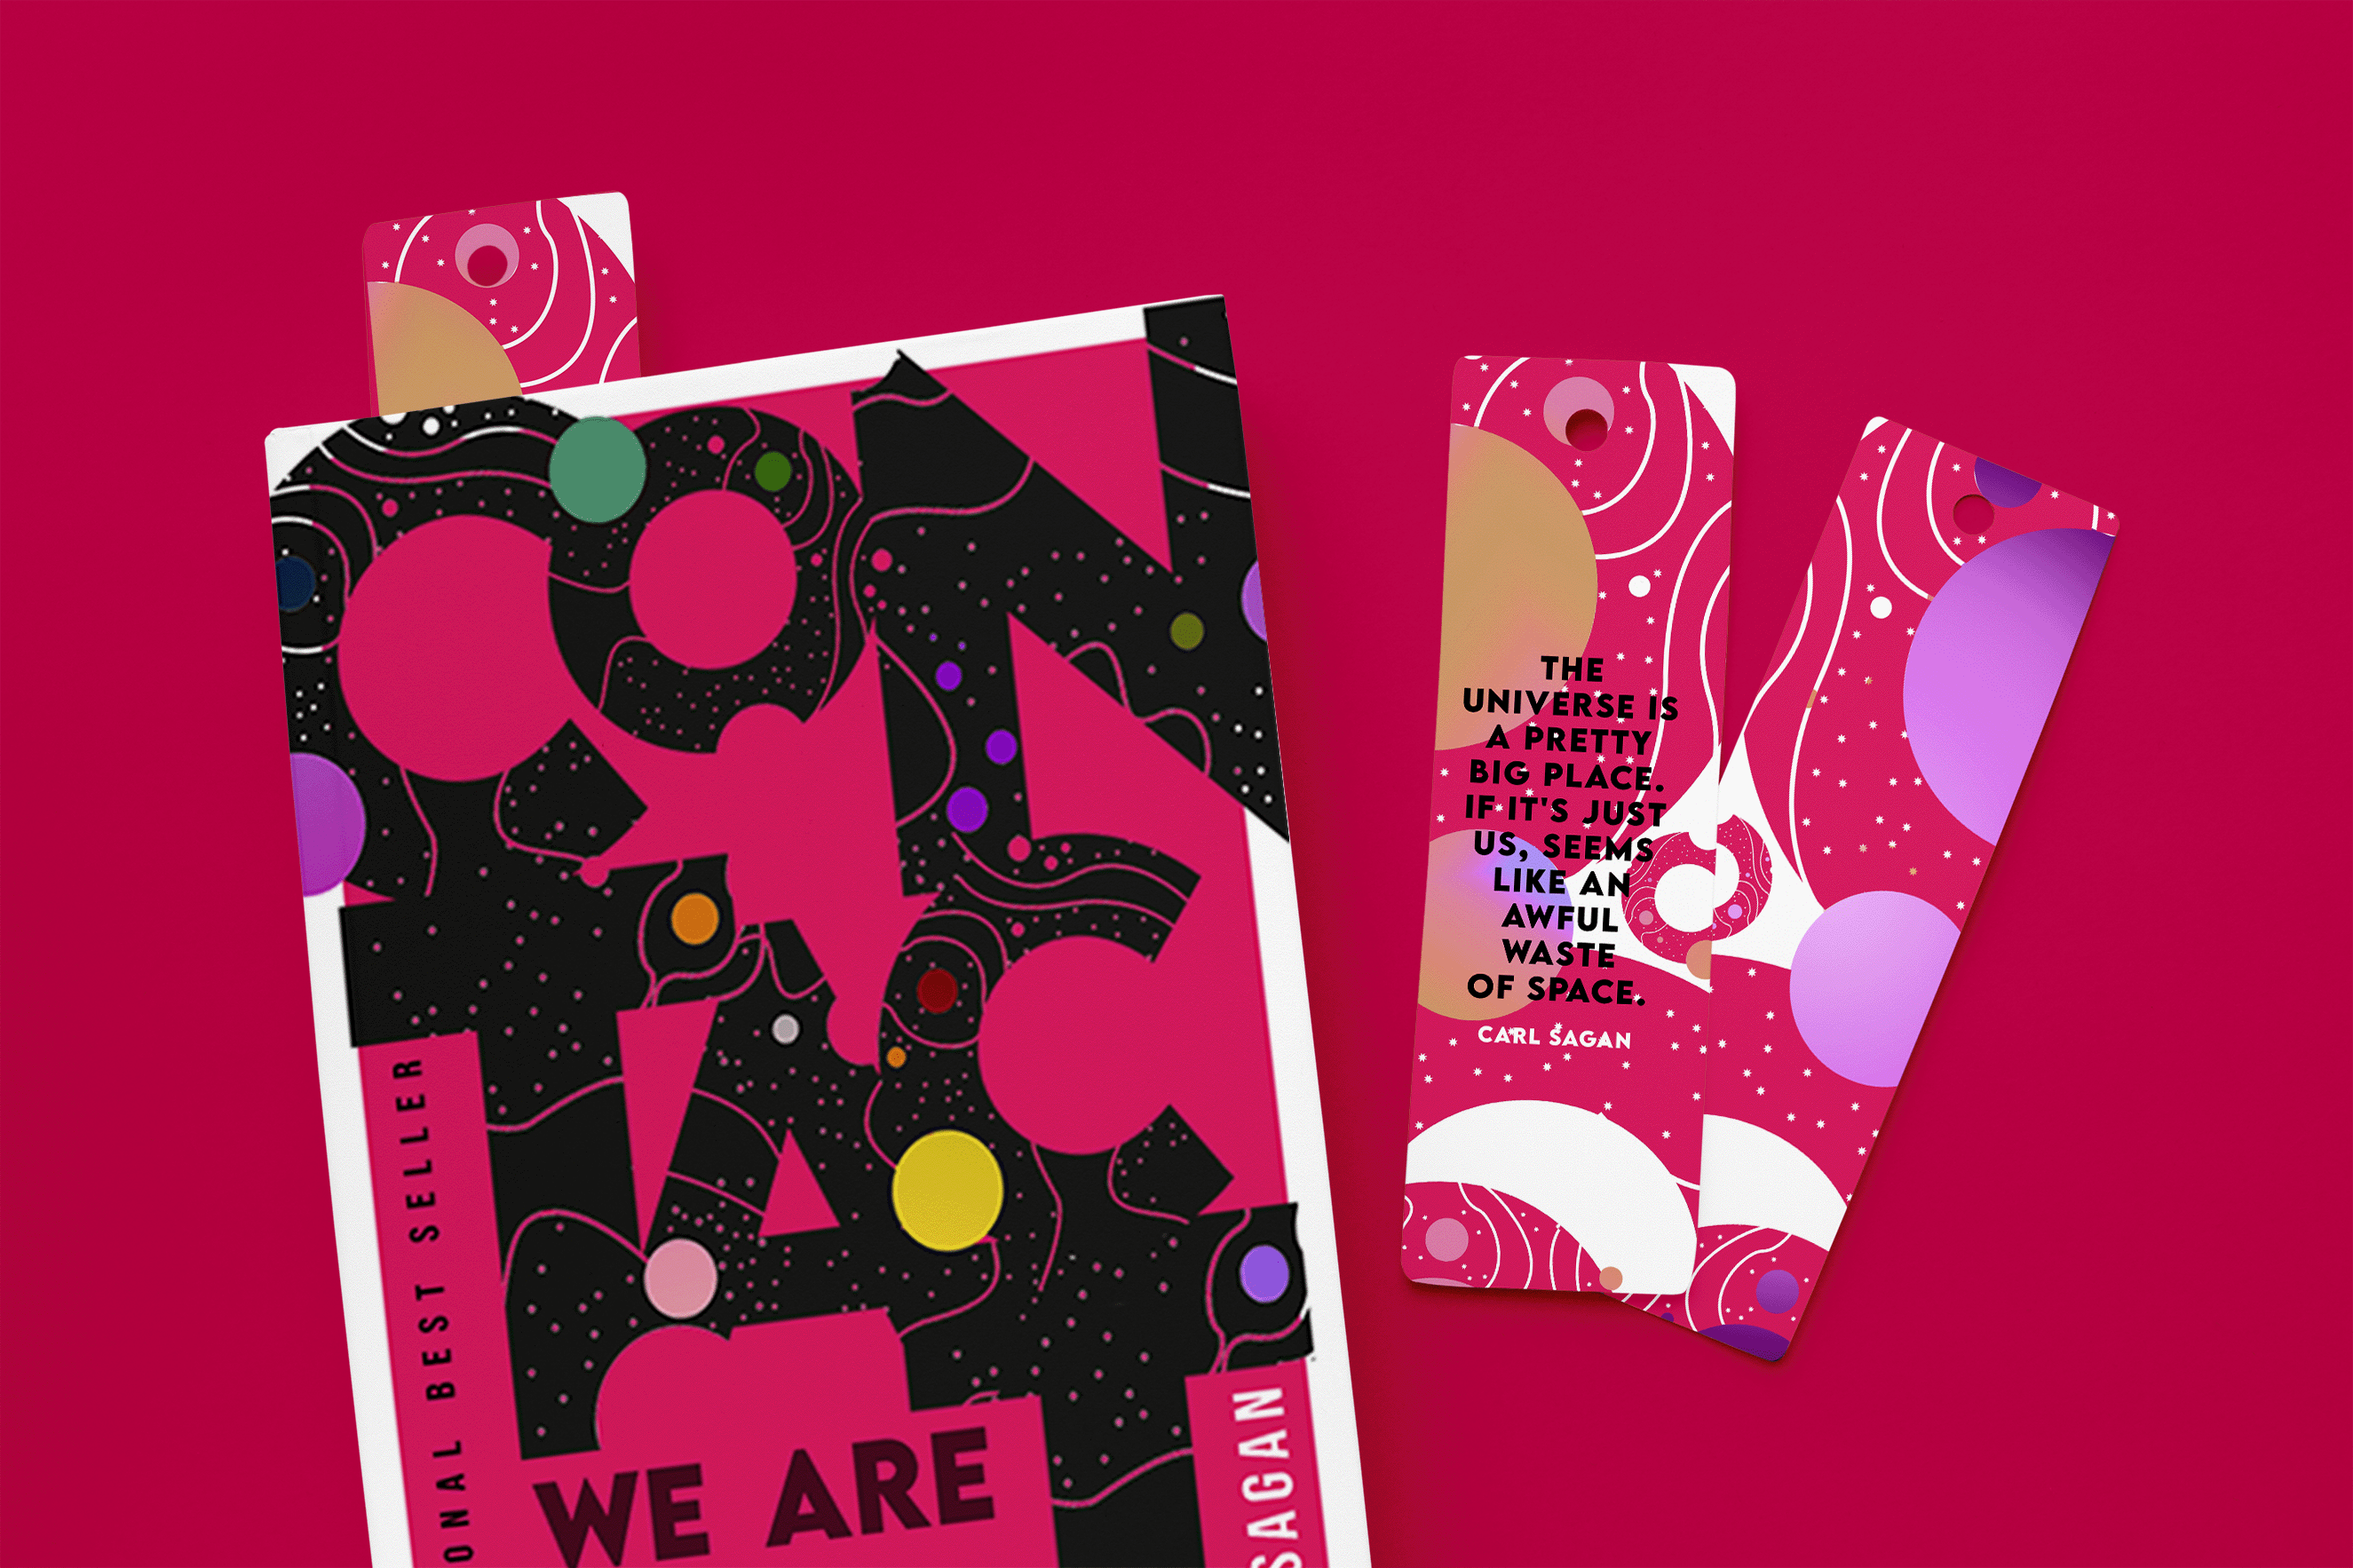 Red Book Cover with title contact made out of interconnected type and bookmark bearing the words "the universe is a pretty big place if it is just us it seems like an awful waste"